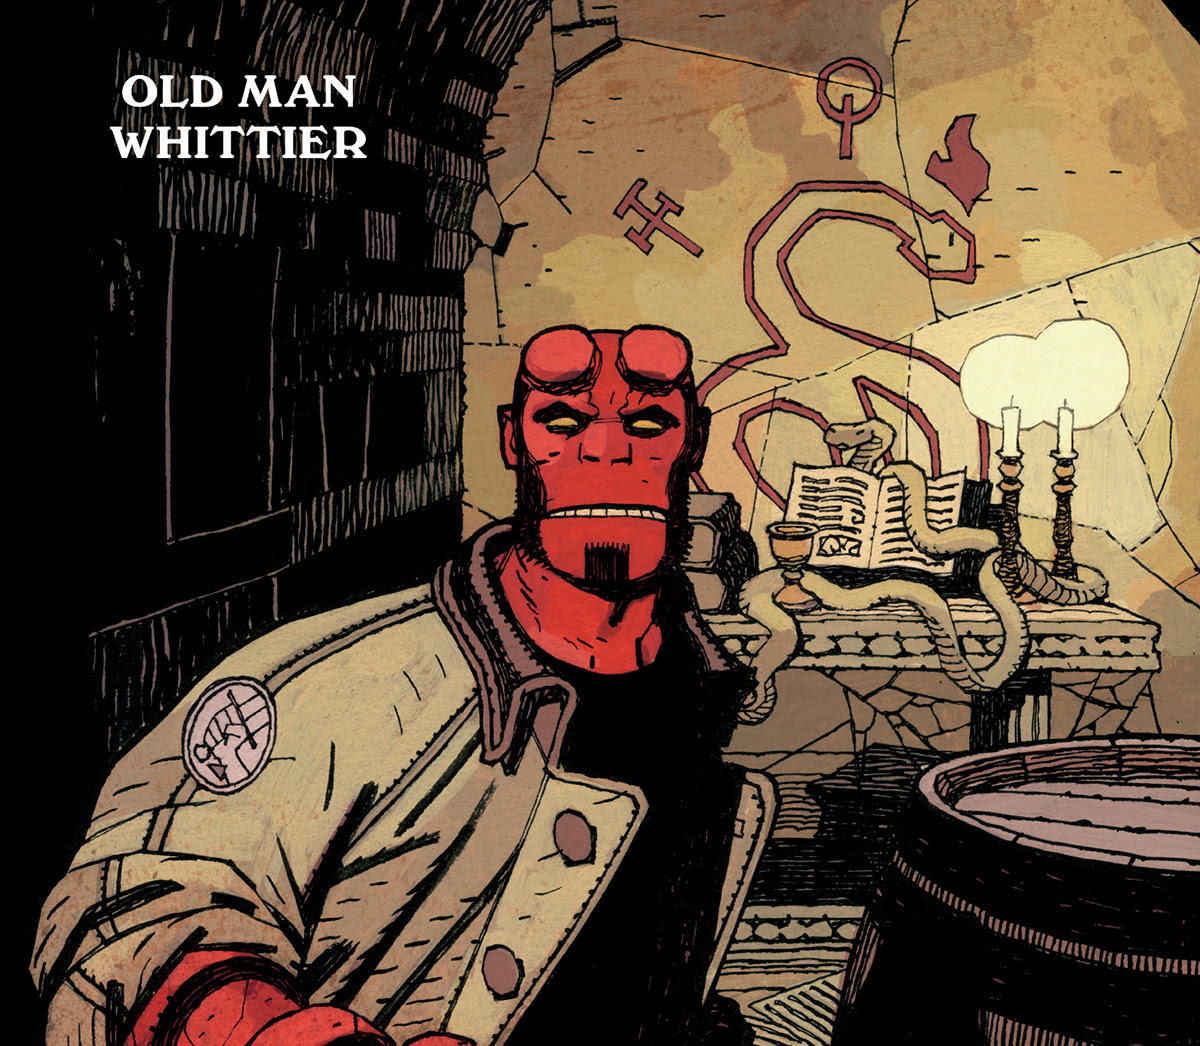 New 'Hellboy and the B.P.R.D.: Old Man Whittier' one-shot coming in June